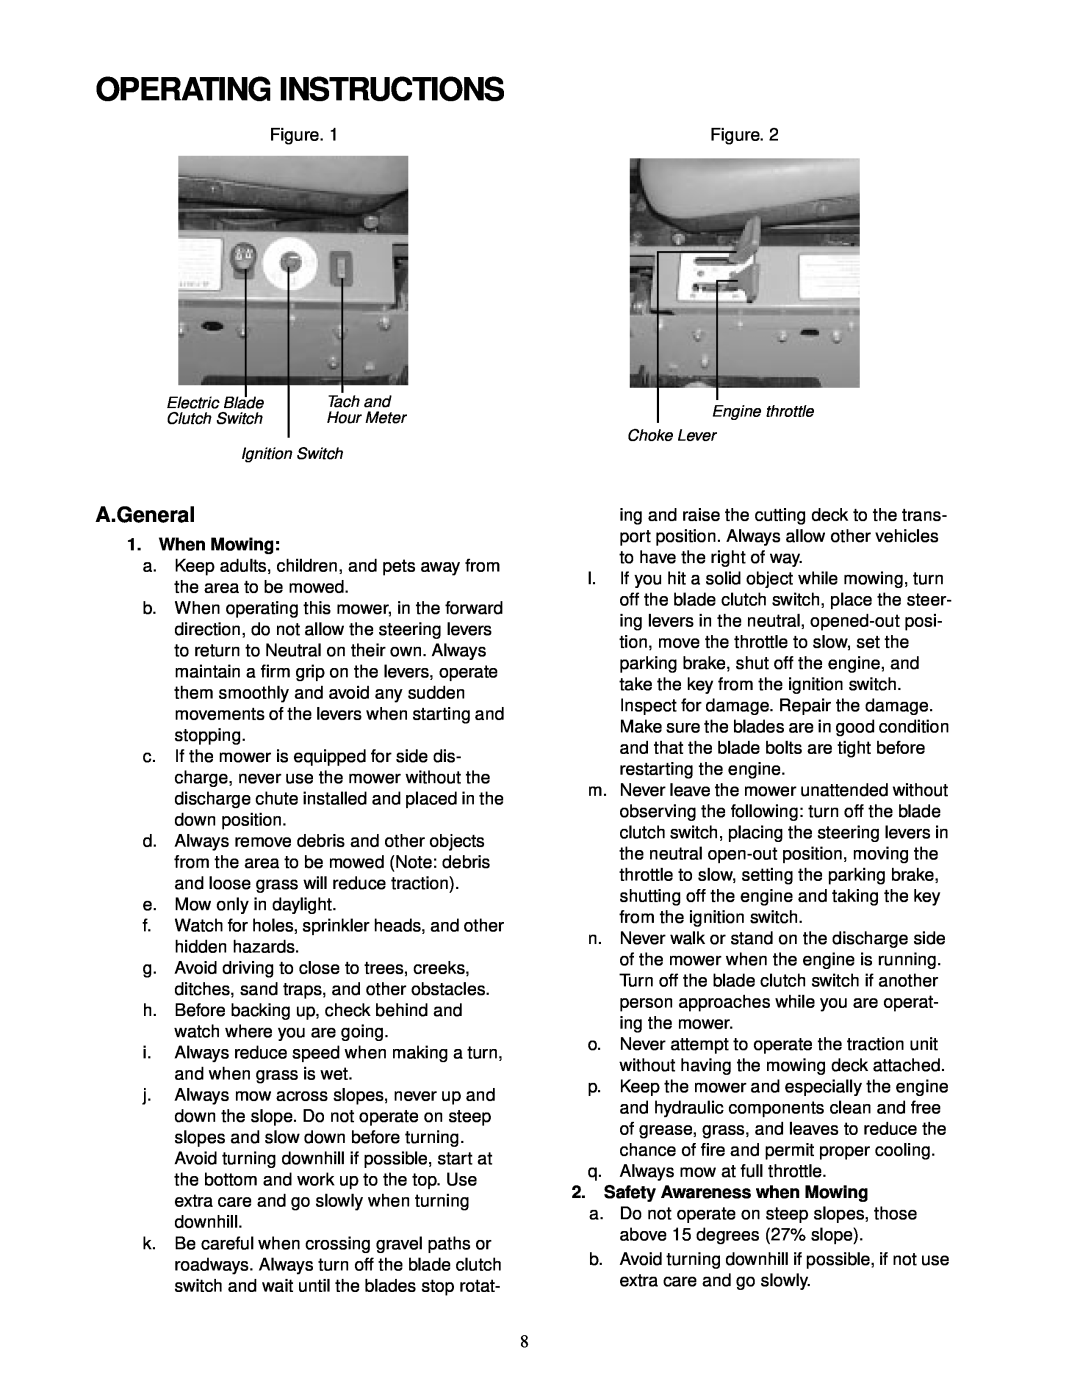 Cub Cadet 18HP service manual Operating Instructions, A.General, When Mowing, Safety Awareness when Mowing 